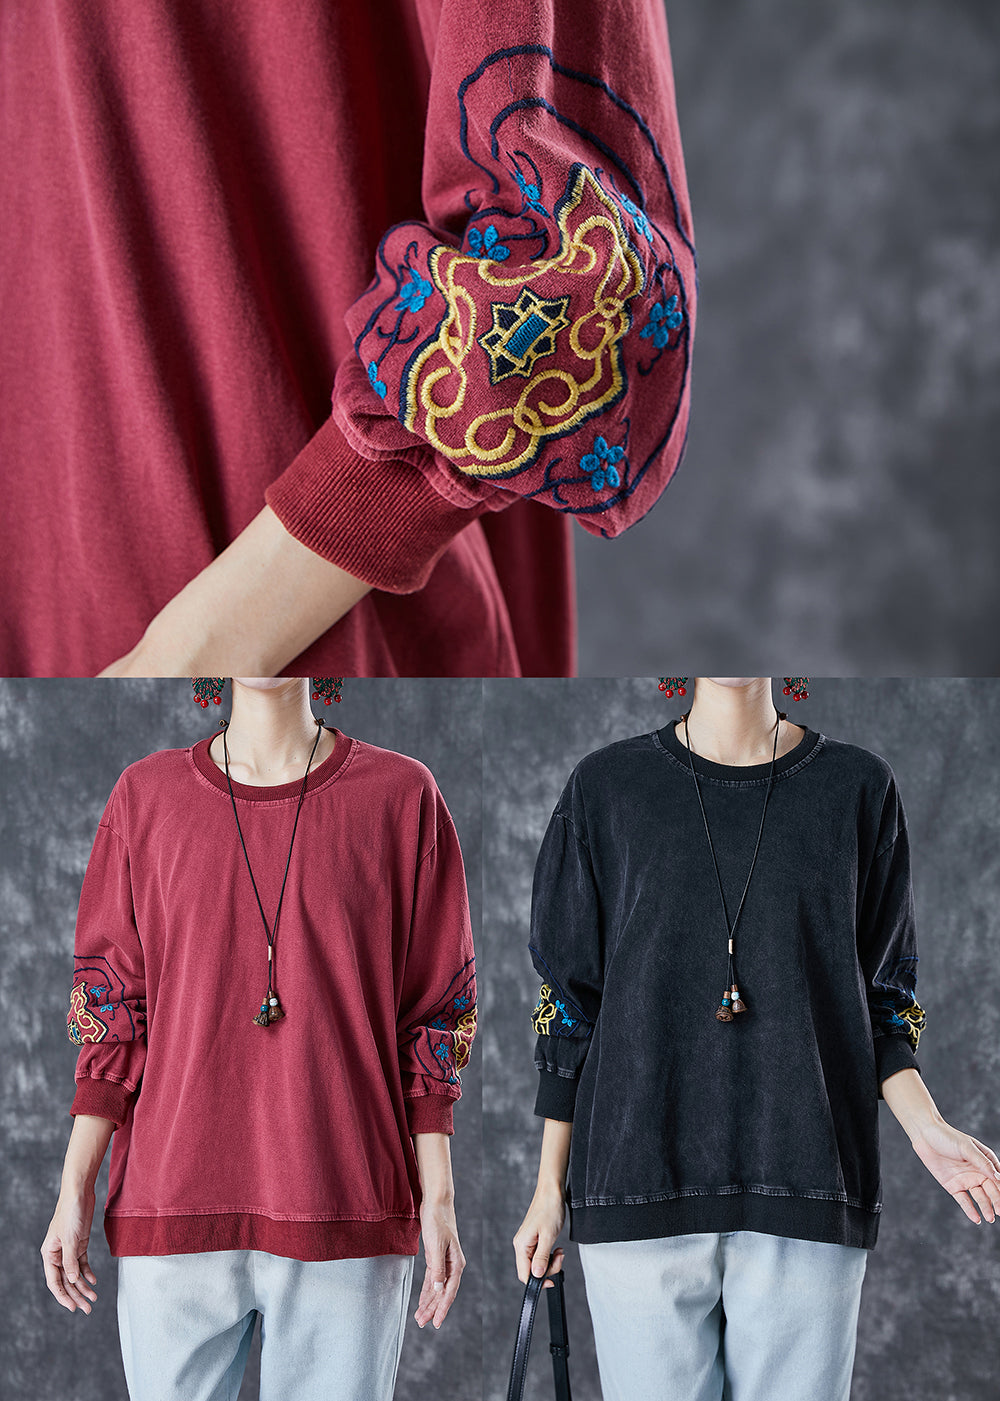 Style Dull Red Embroideried Cotton Loose Sweatshirts Top Fall